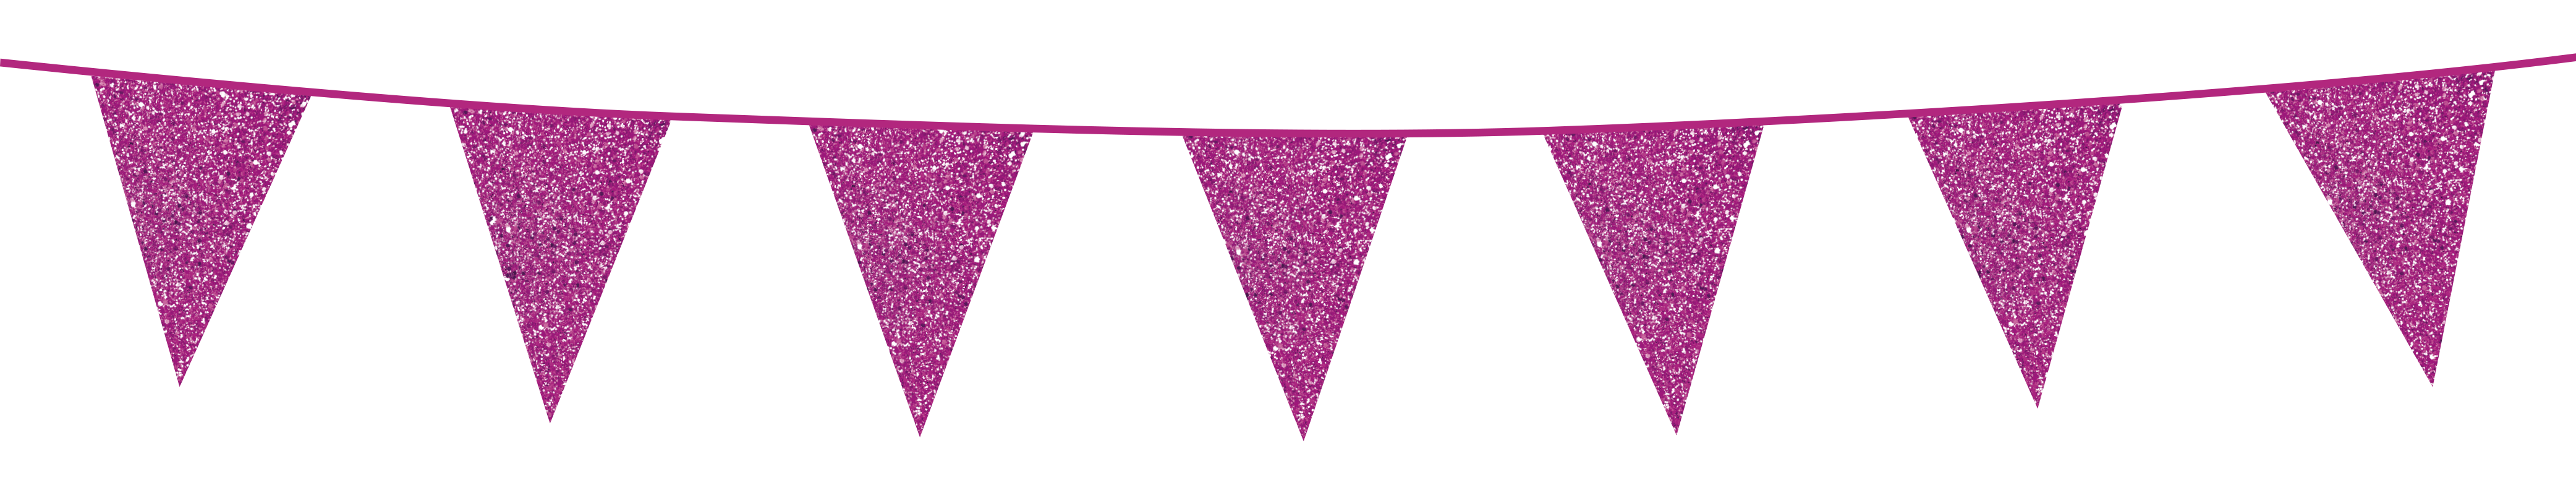 Bunting Glitter 6m. hot pink - size flags 20x30cm per 6